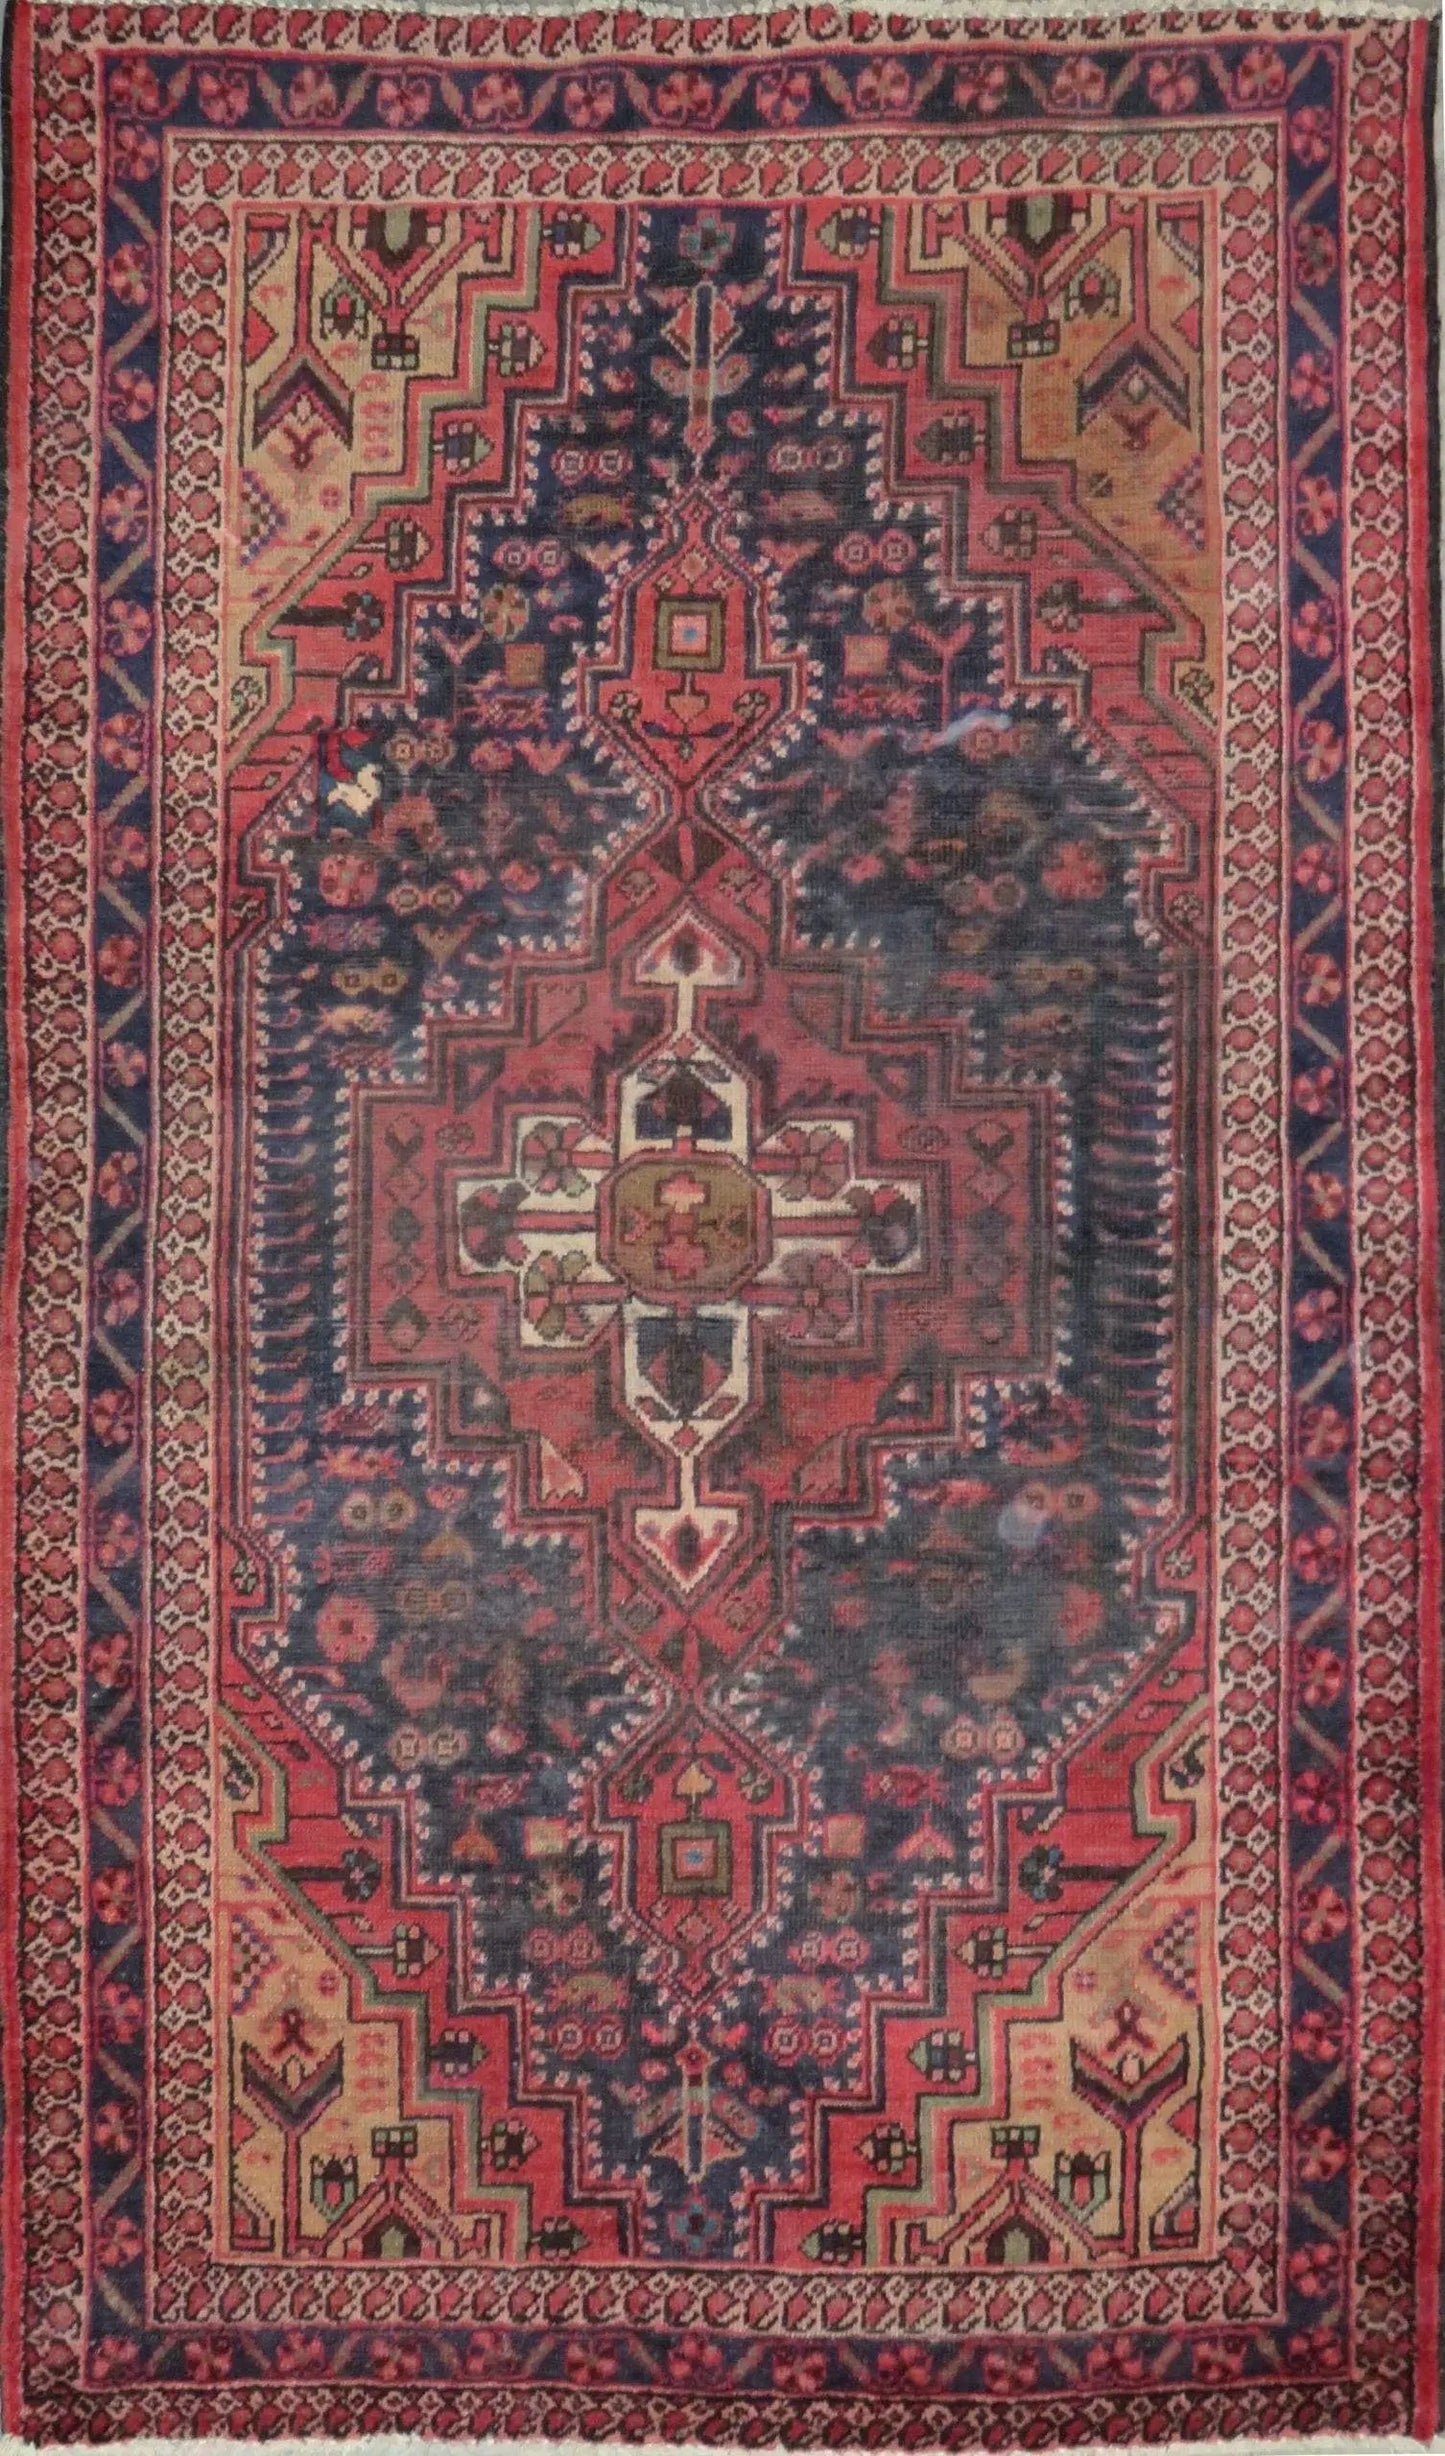 Hand-Knotted Persian Wool Rug _ Luxurious Vintage Design, 7'8" x 4'6", Artisan Crafted